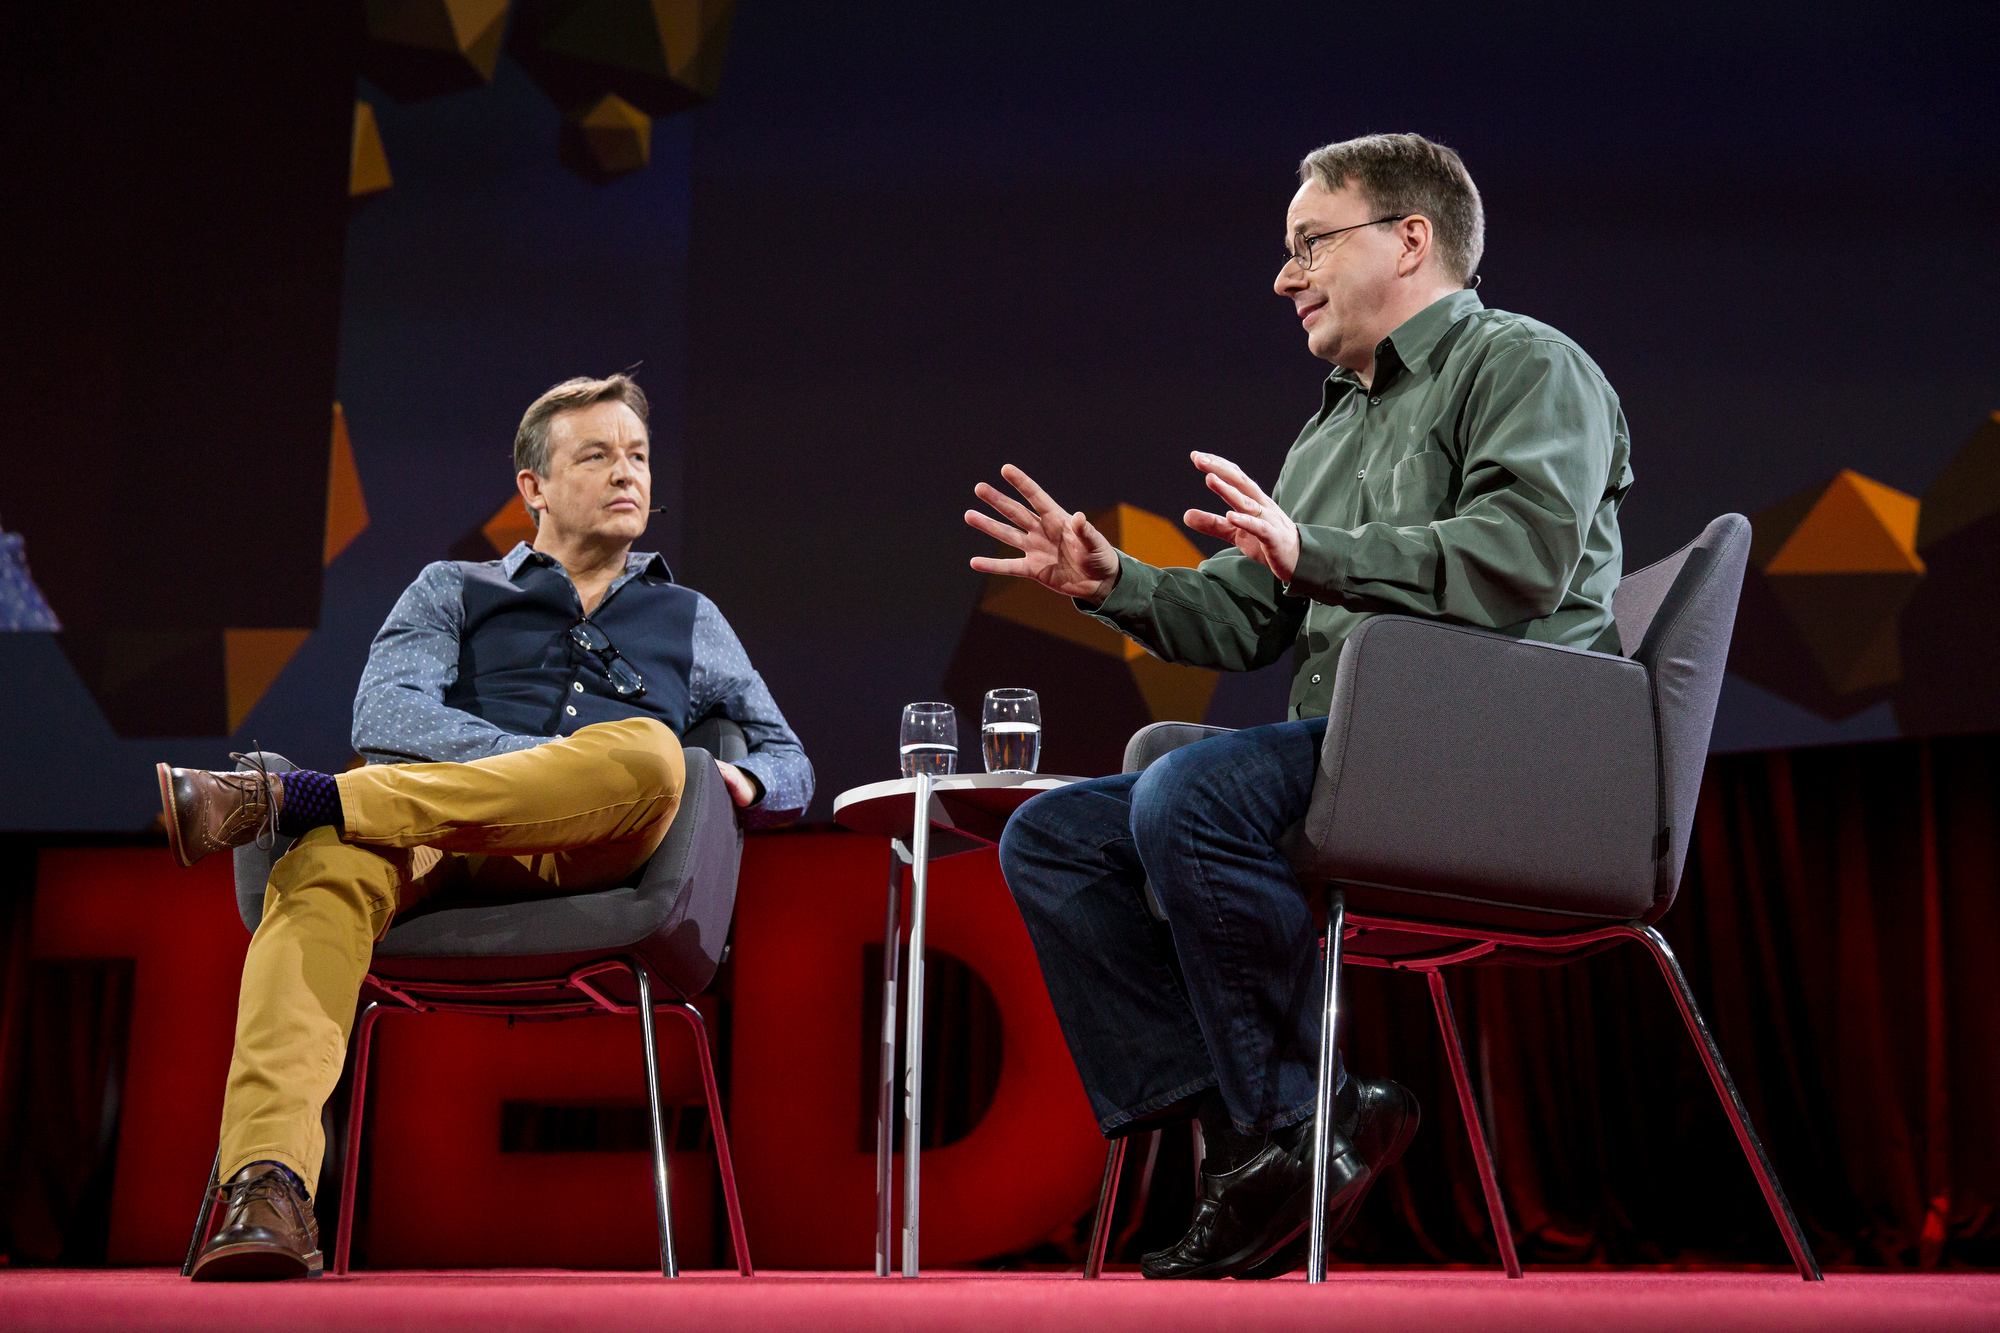 Chris Anderson interviews Linus Torvalds onstage at TED2016.